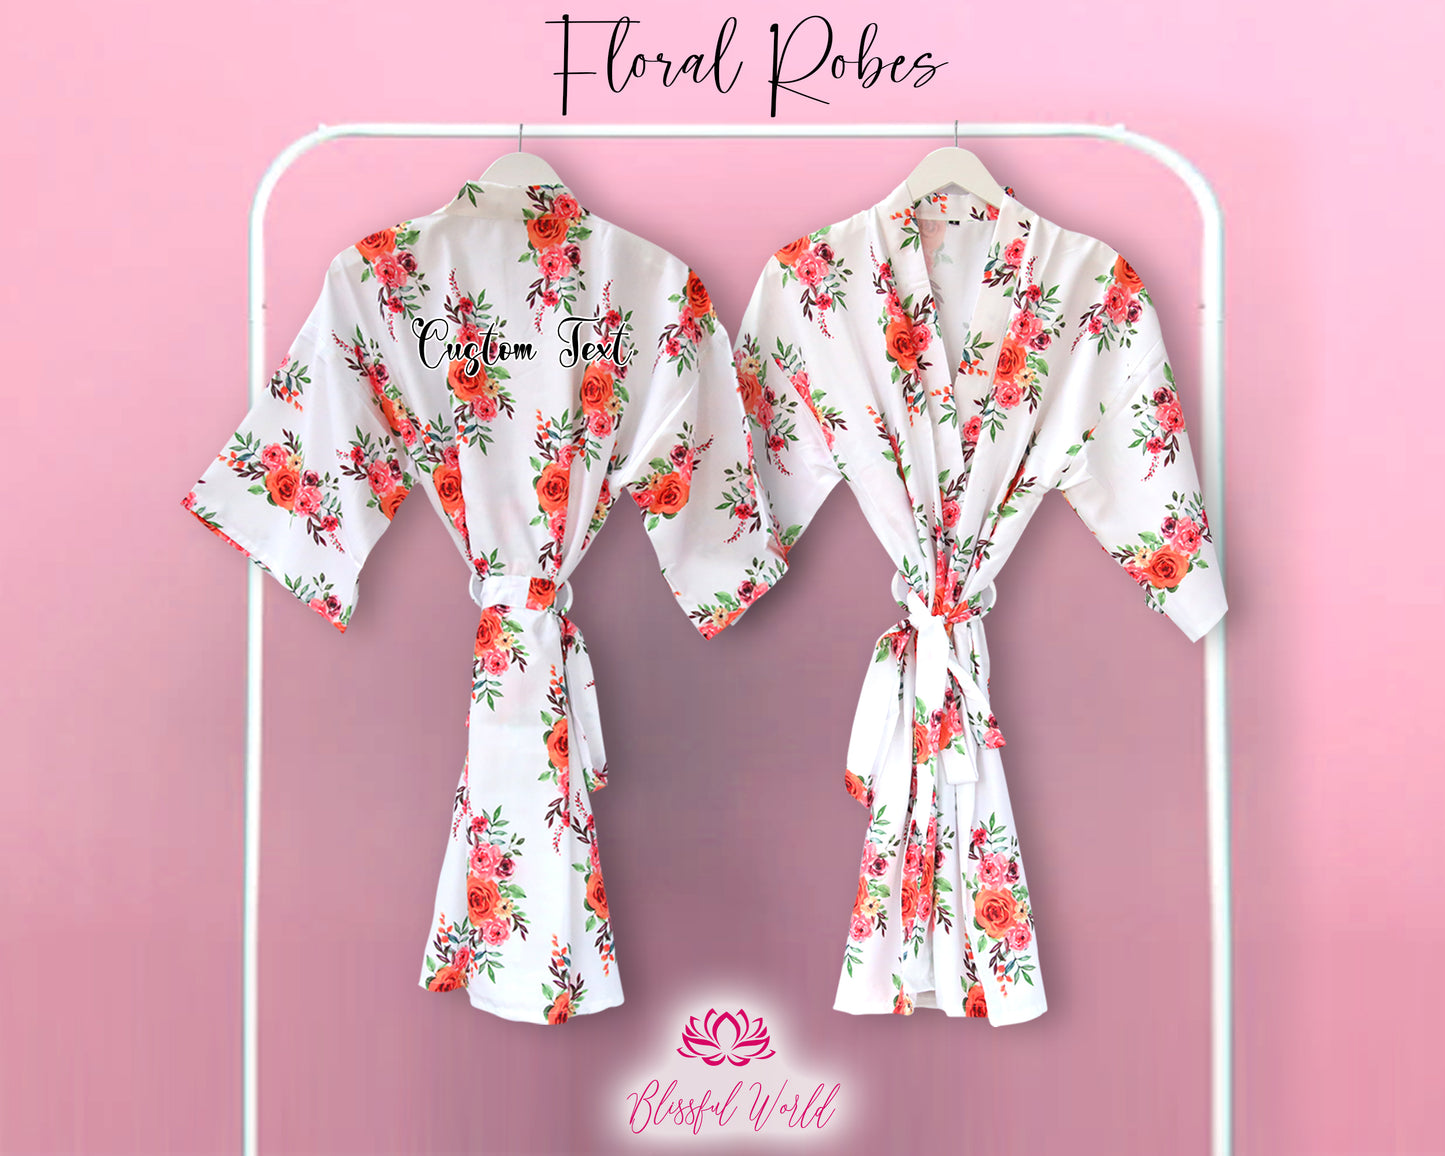 Robe, Personalized Robes, Custom Text, Floral Kimono, Floral Robes, Bridal Party, Wedding Robes, Satin Robe, Print Robes, Floral satin Robe